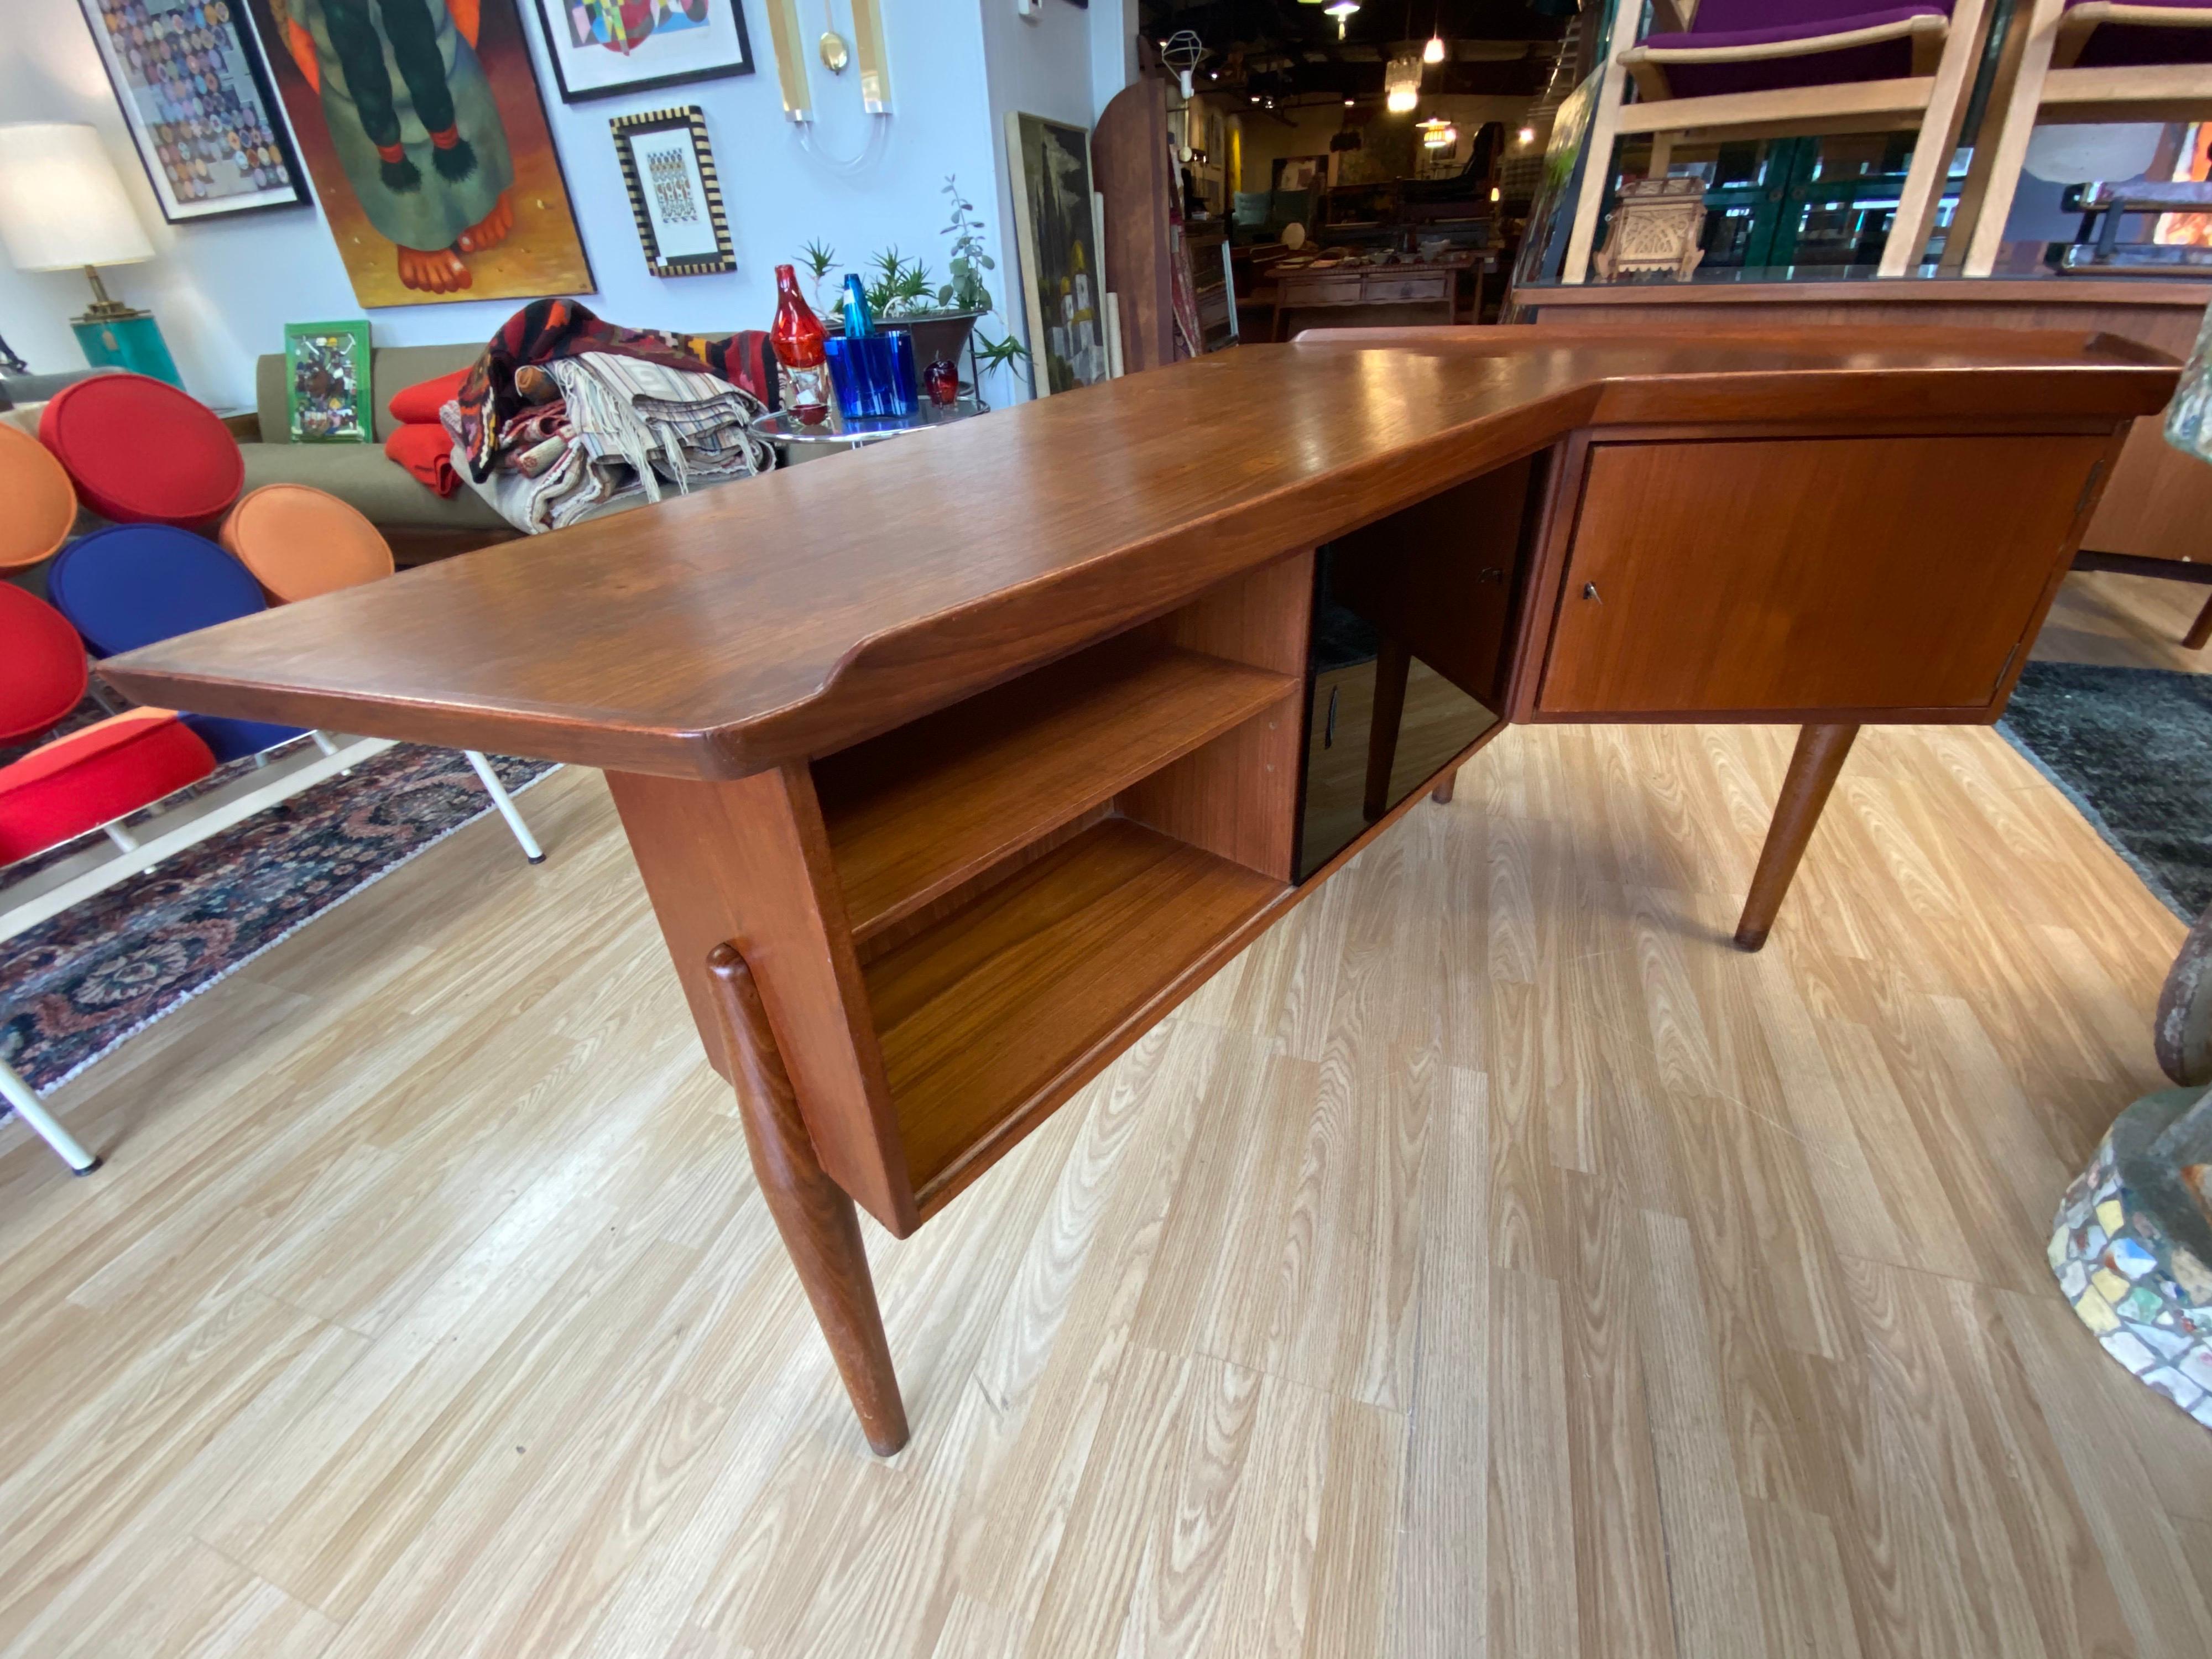 Unique Mid-Century Modern teak desk designed by Arne Hovmand-Olsen features a boomerang shape, three drawers with inset teak pulls and the backside features two shelves for storage, a sliding ebonized door that opens up to more storage, and a